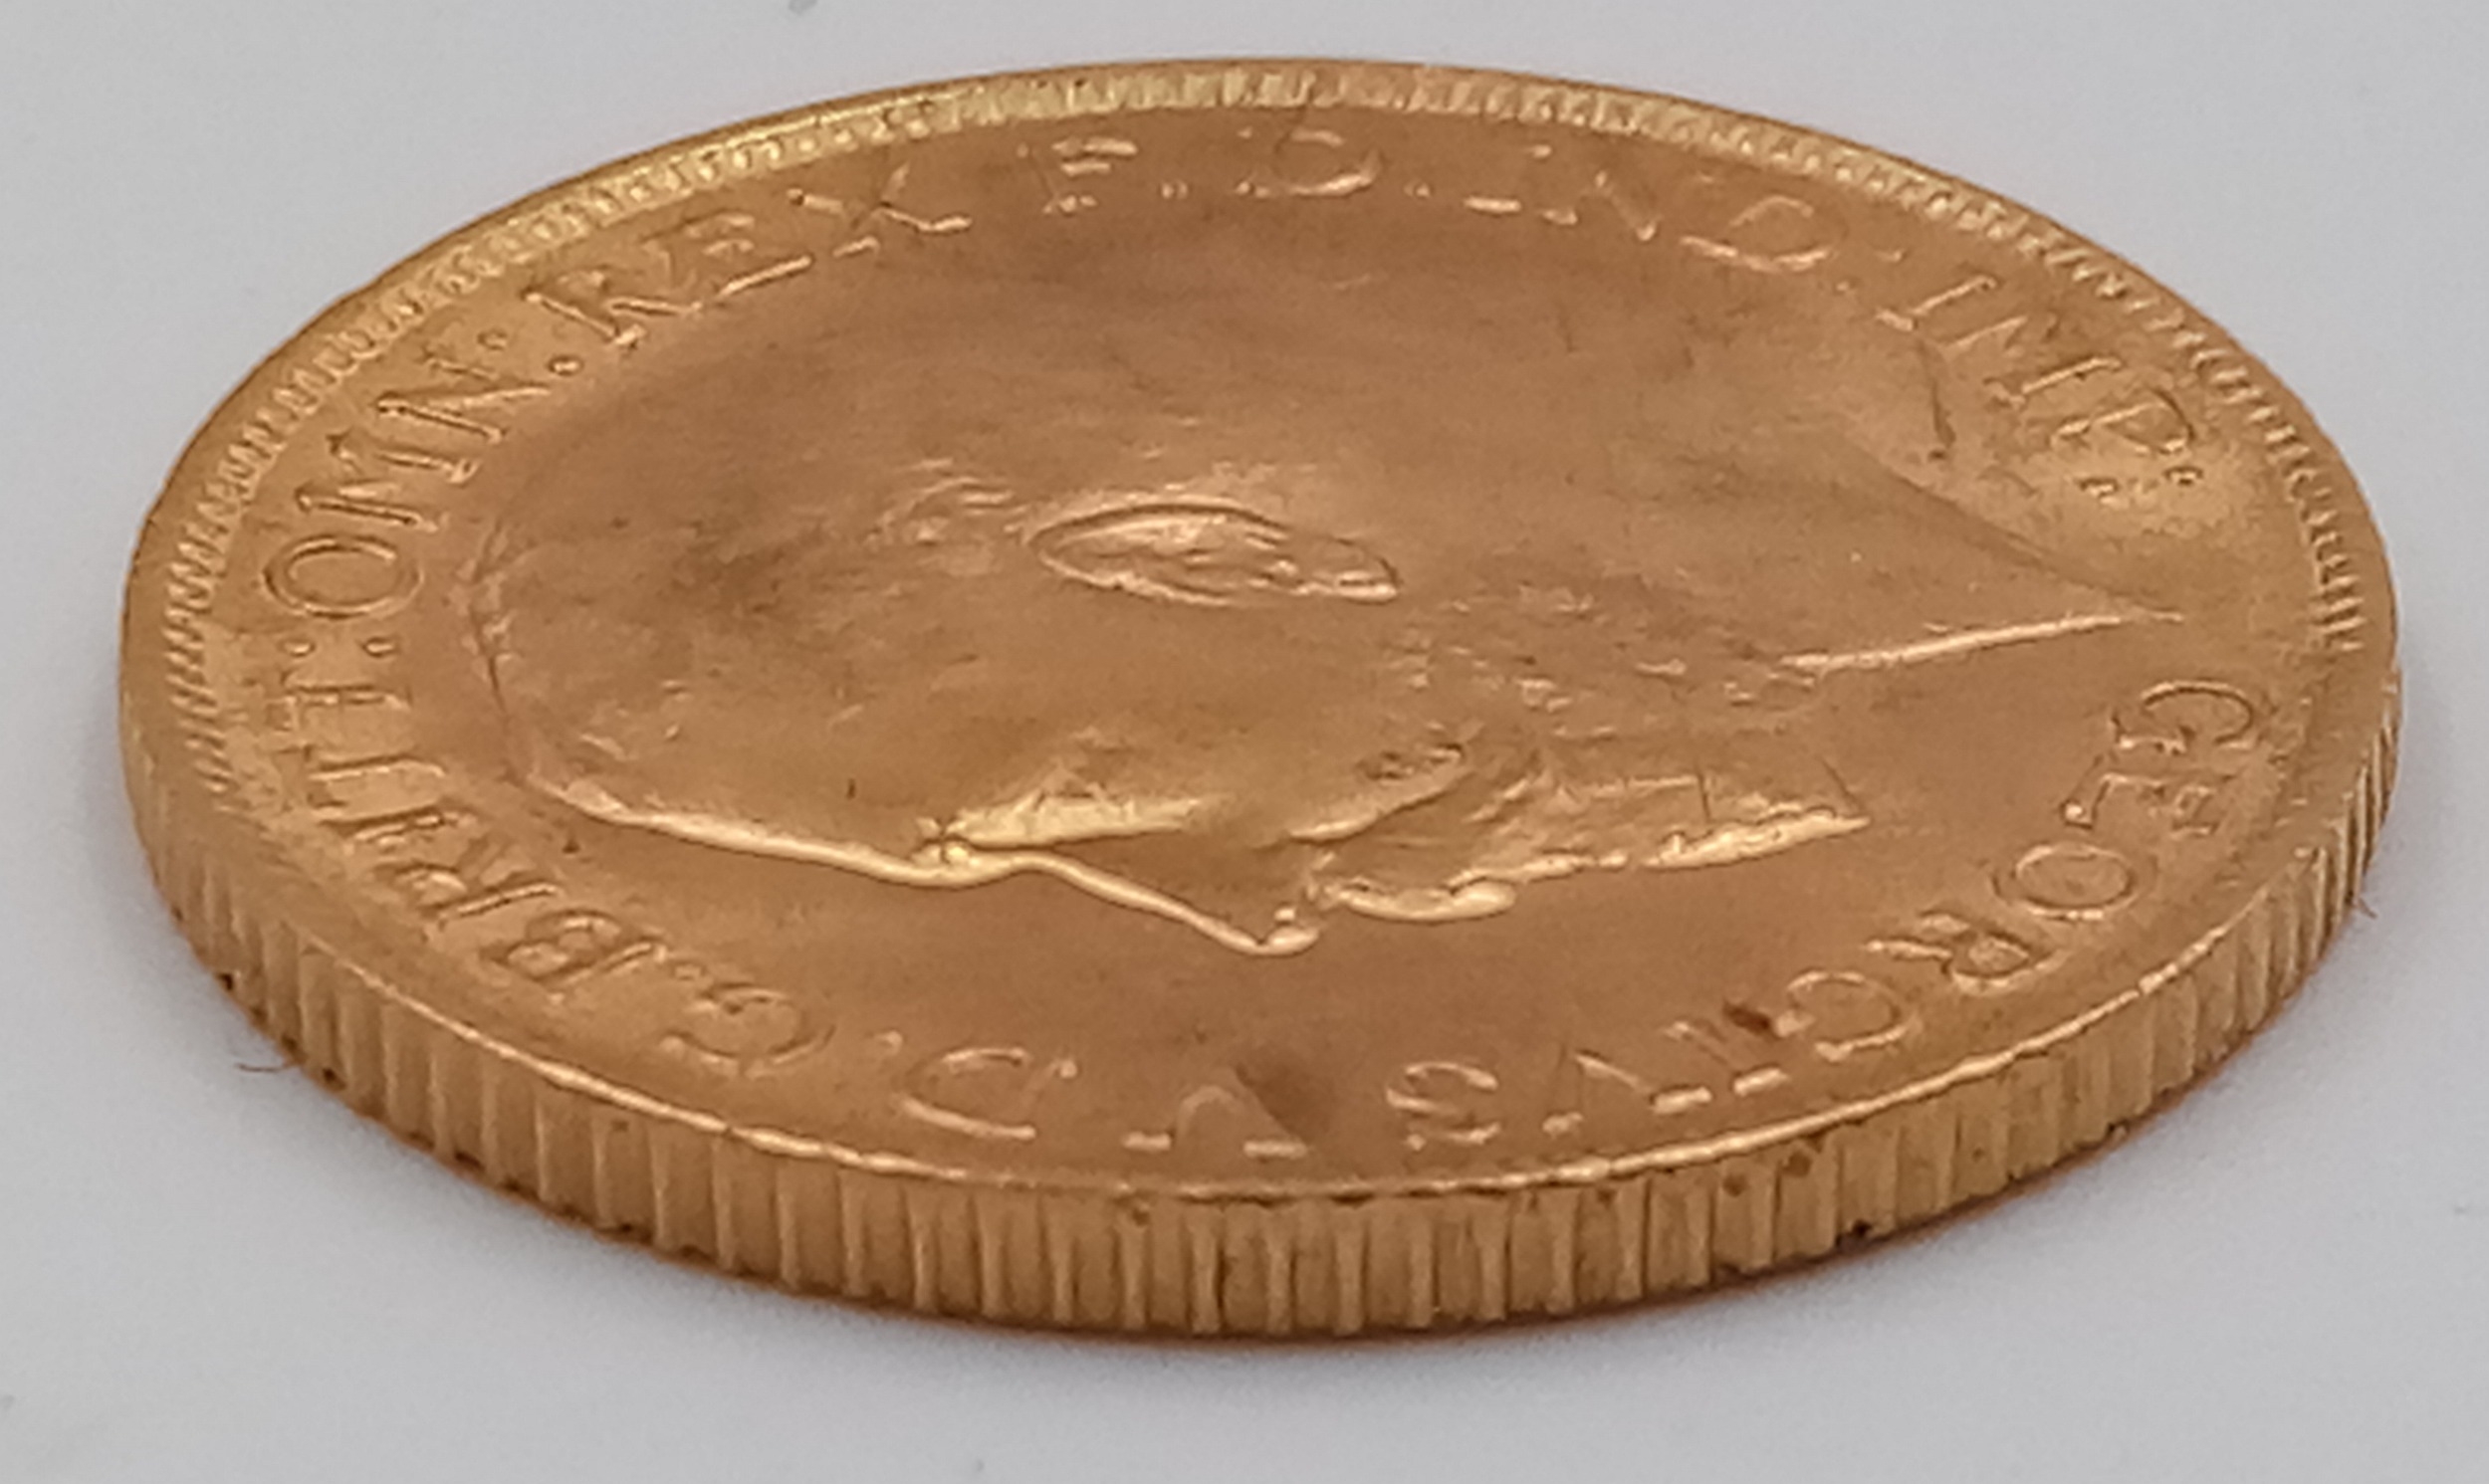 A 22 K yellow gold, King George V, 1913, full weight: (8 g), in good condition but please see photos - Image 3 of 3